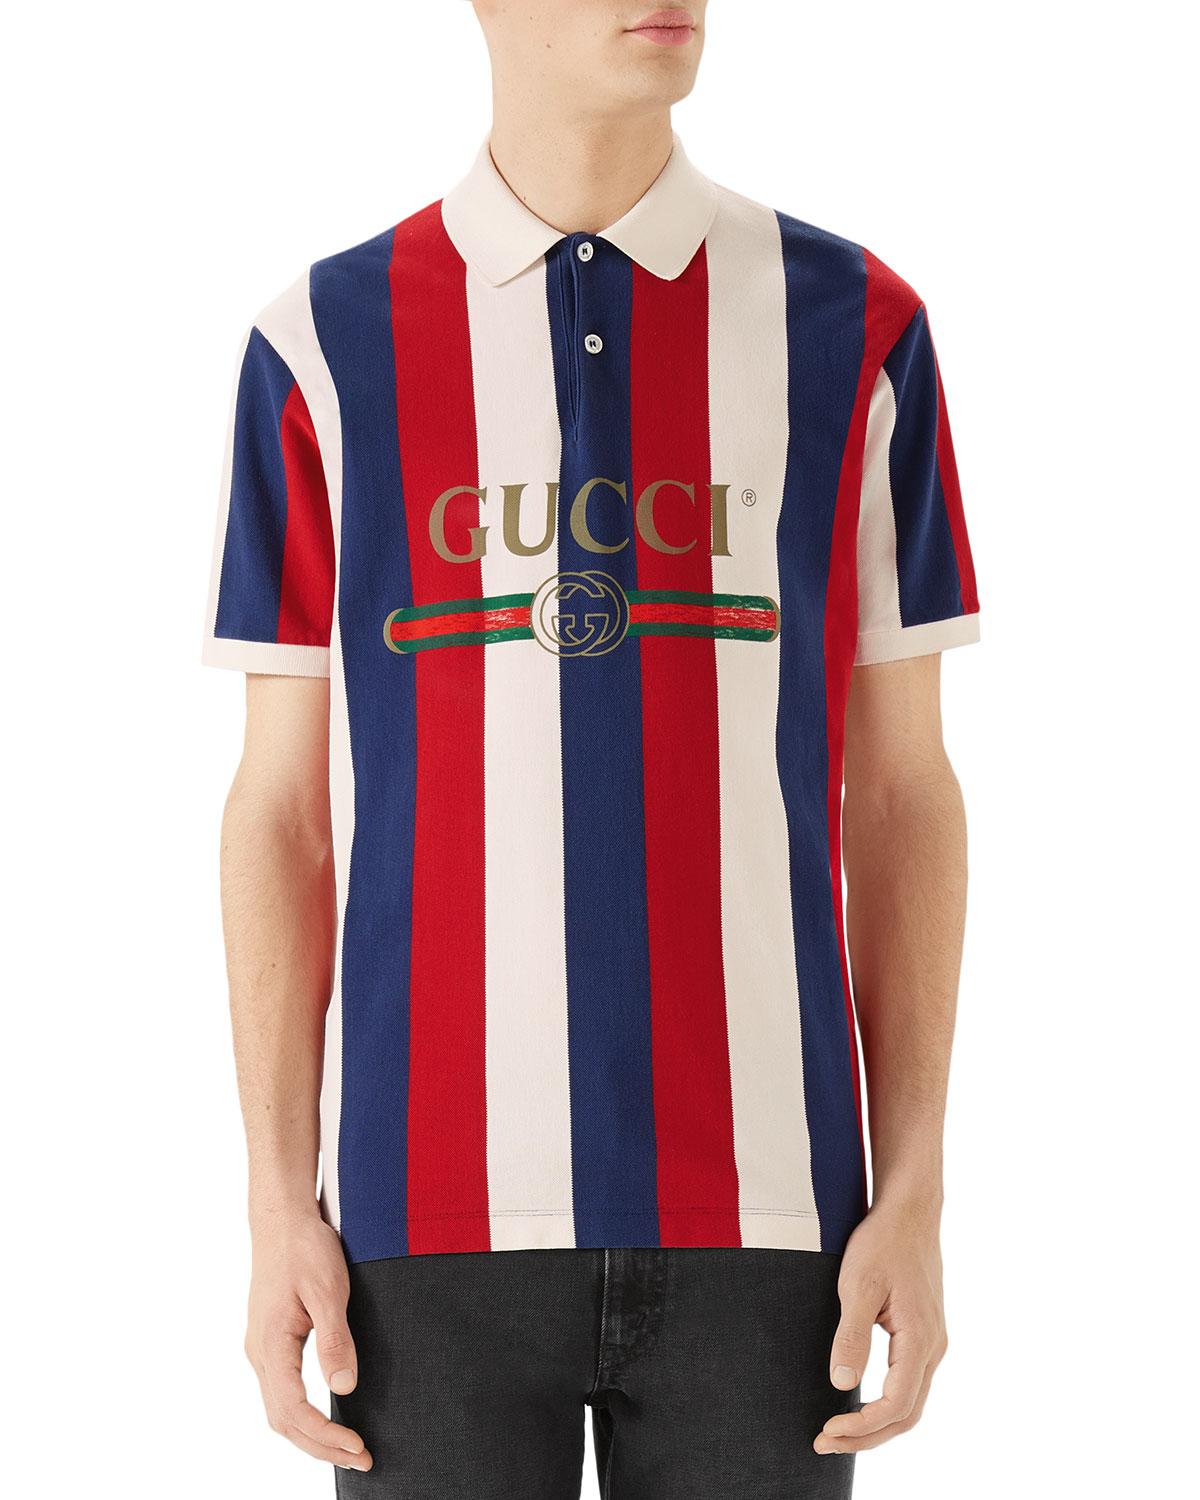 Blue And Red Gucci Shirt U.K., SAVE 39% - everton.is